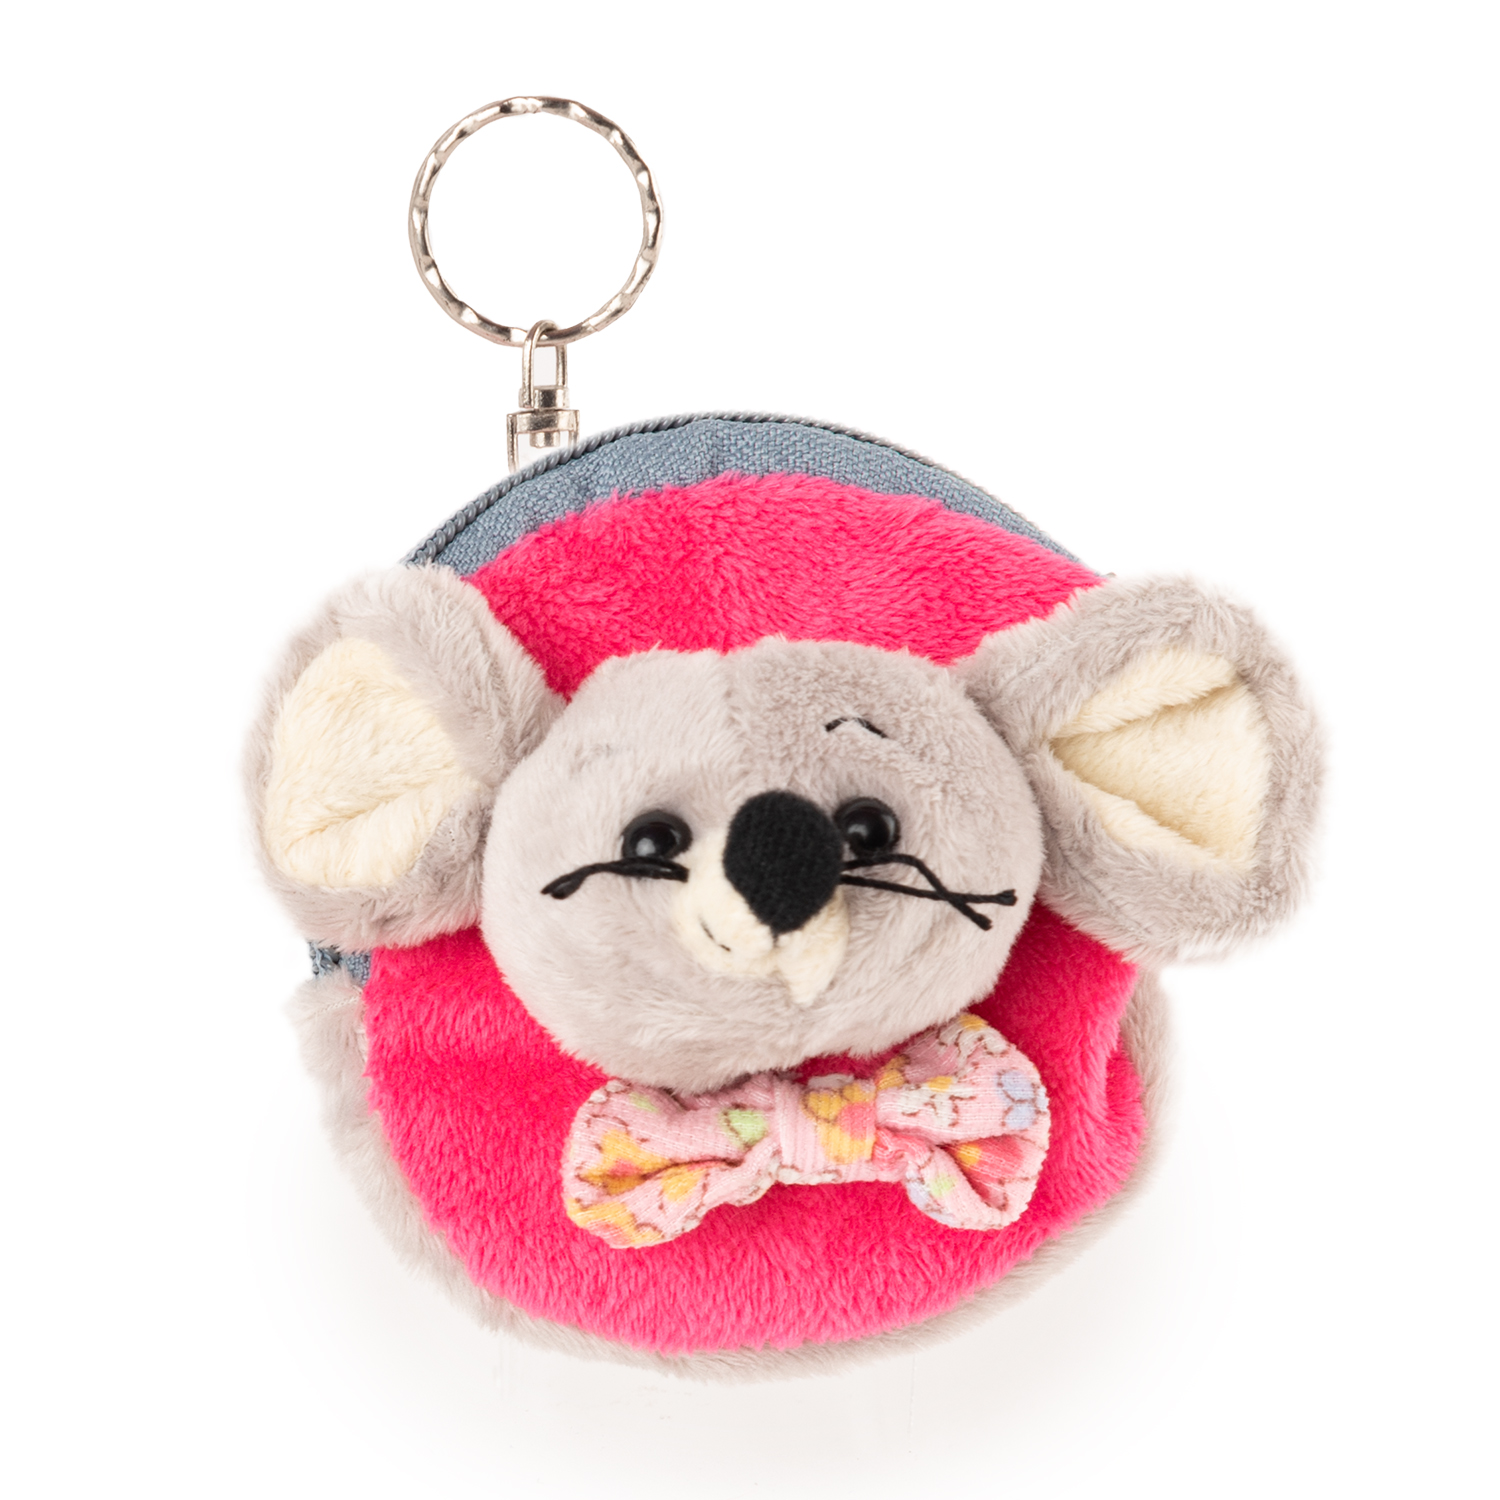 Purse with mouse - Pink